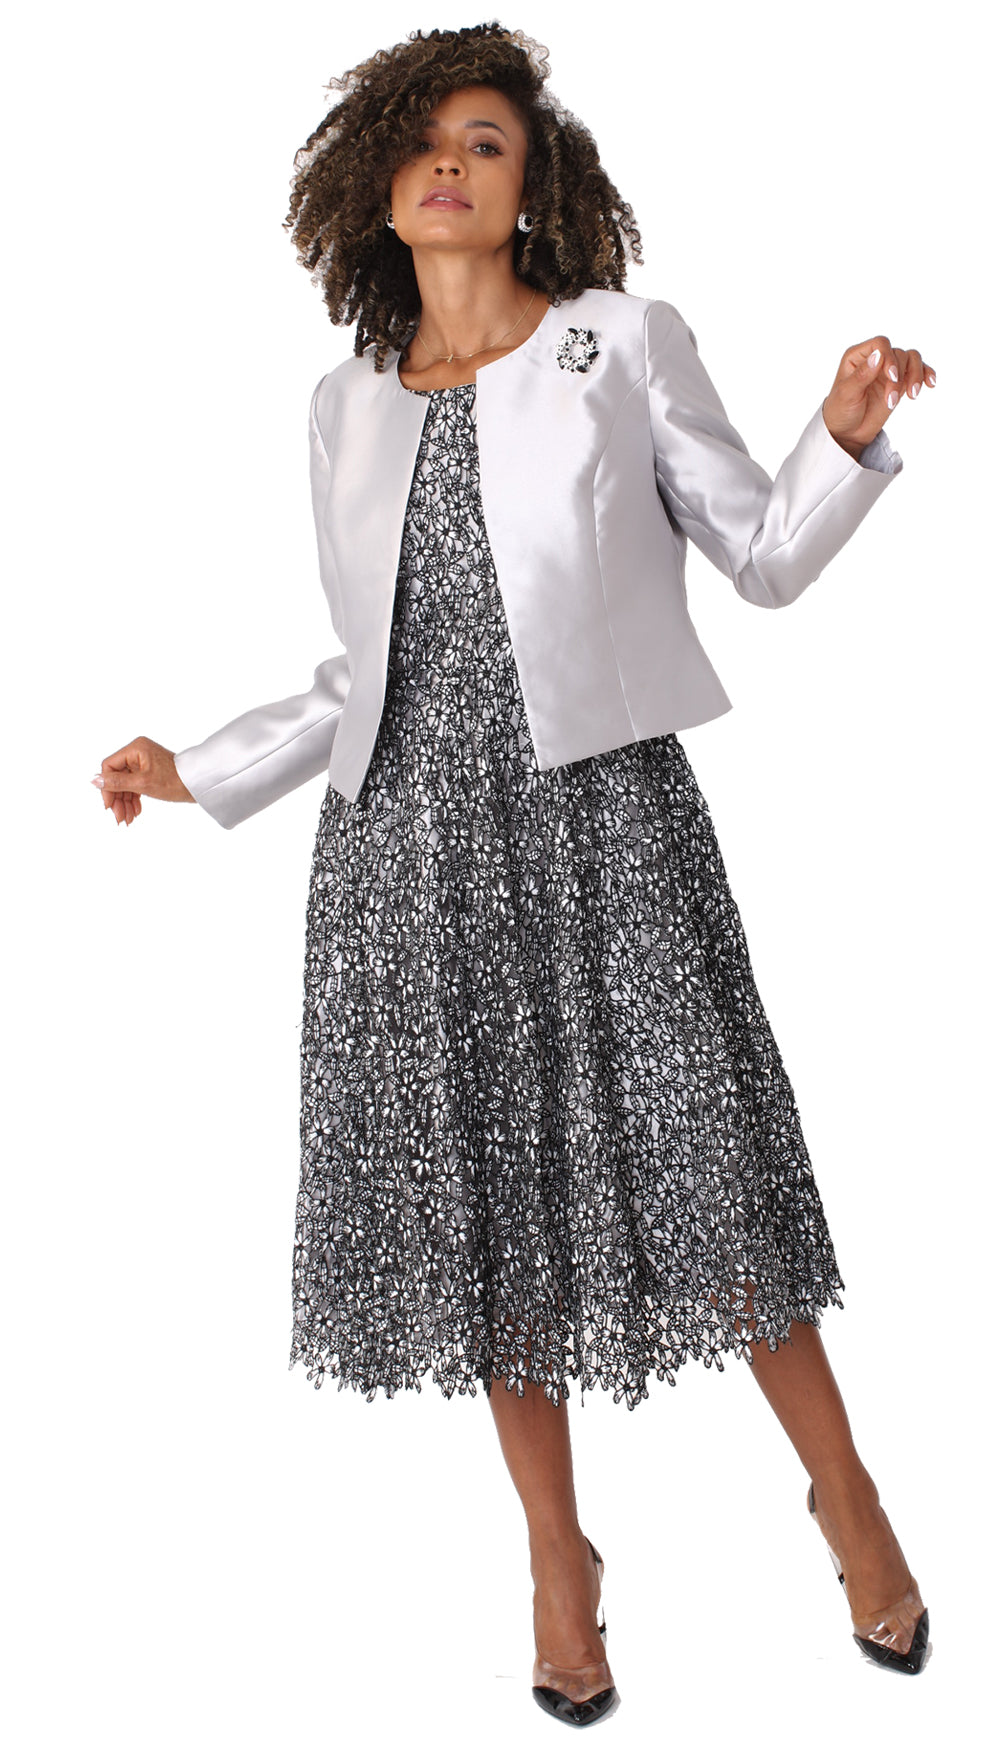 Tally Taylor Church Dress 4805-Silver - Church Suits For Less